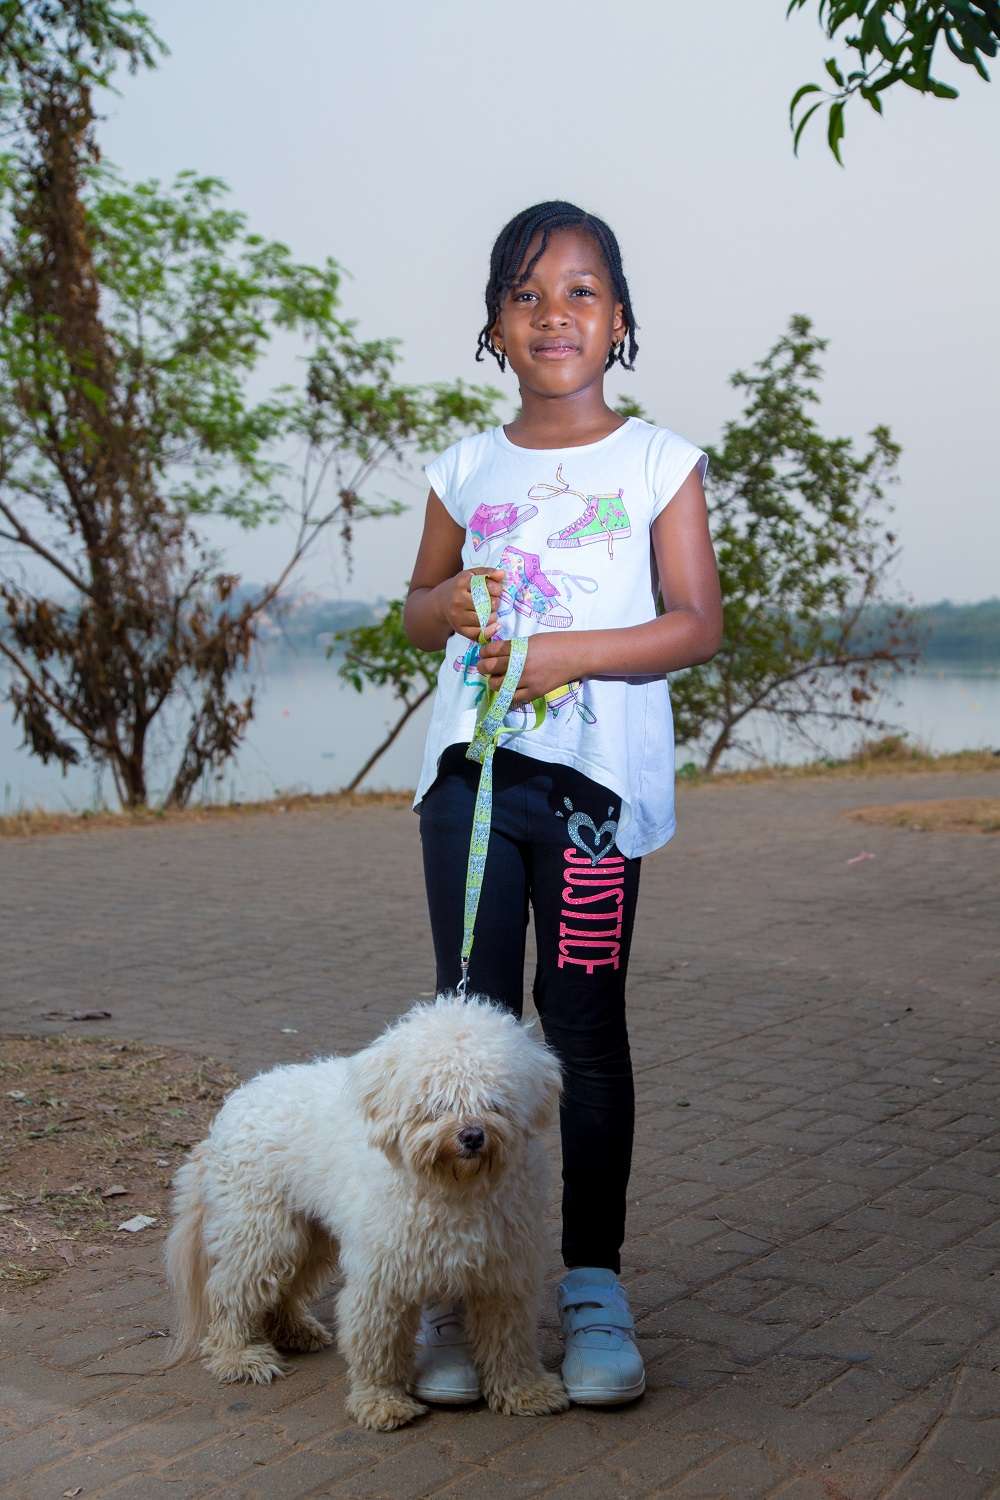 girl-standing-with-dog-on-leash-image-from-tristetix.jpg